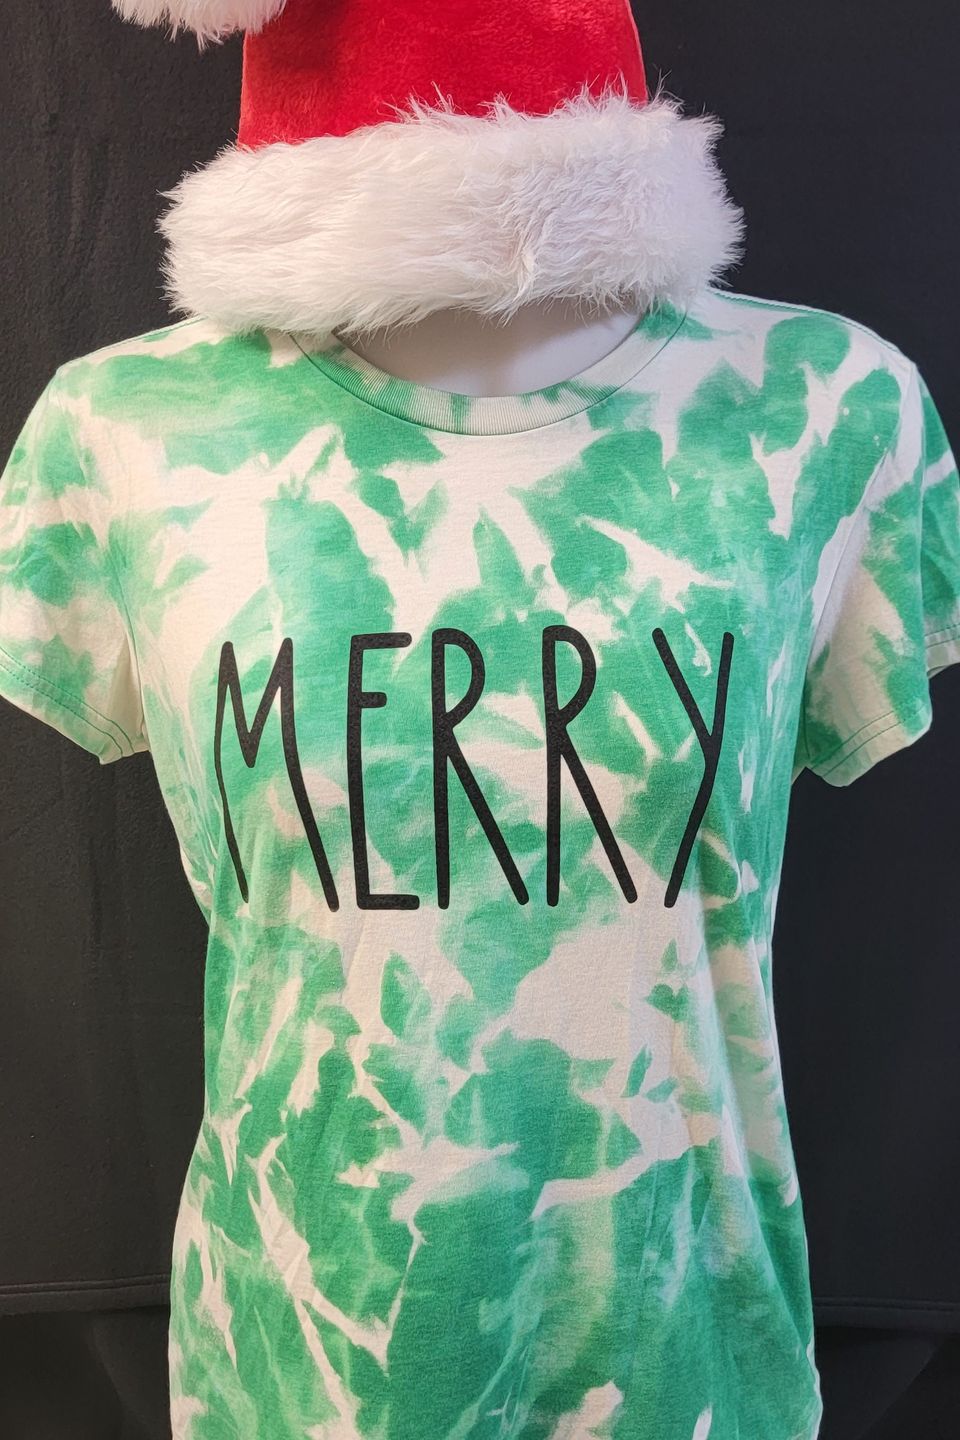 Example of a "Merry" t-shirt using direct-to-film (DTF) transfer.